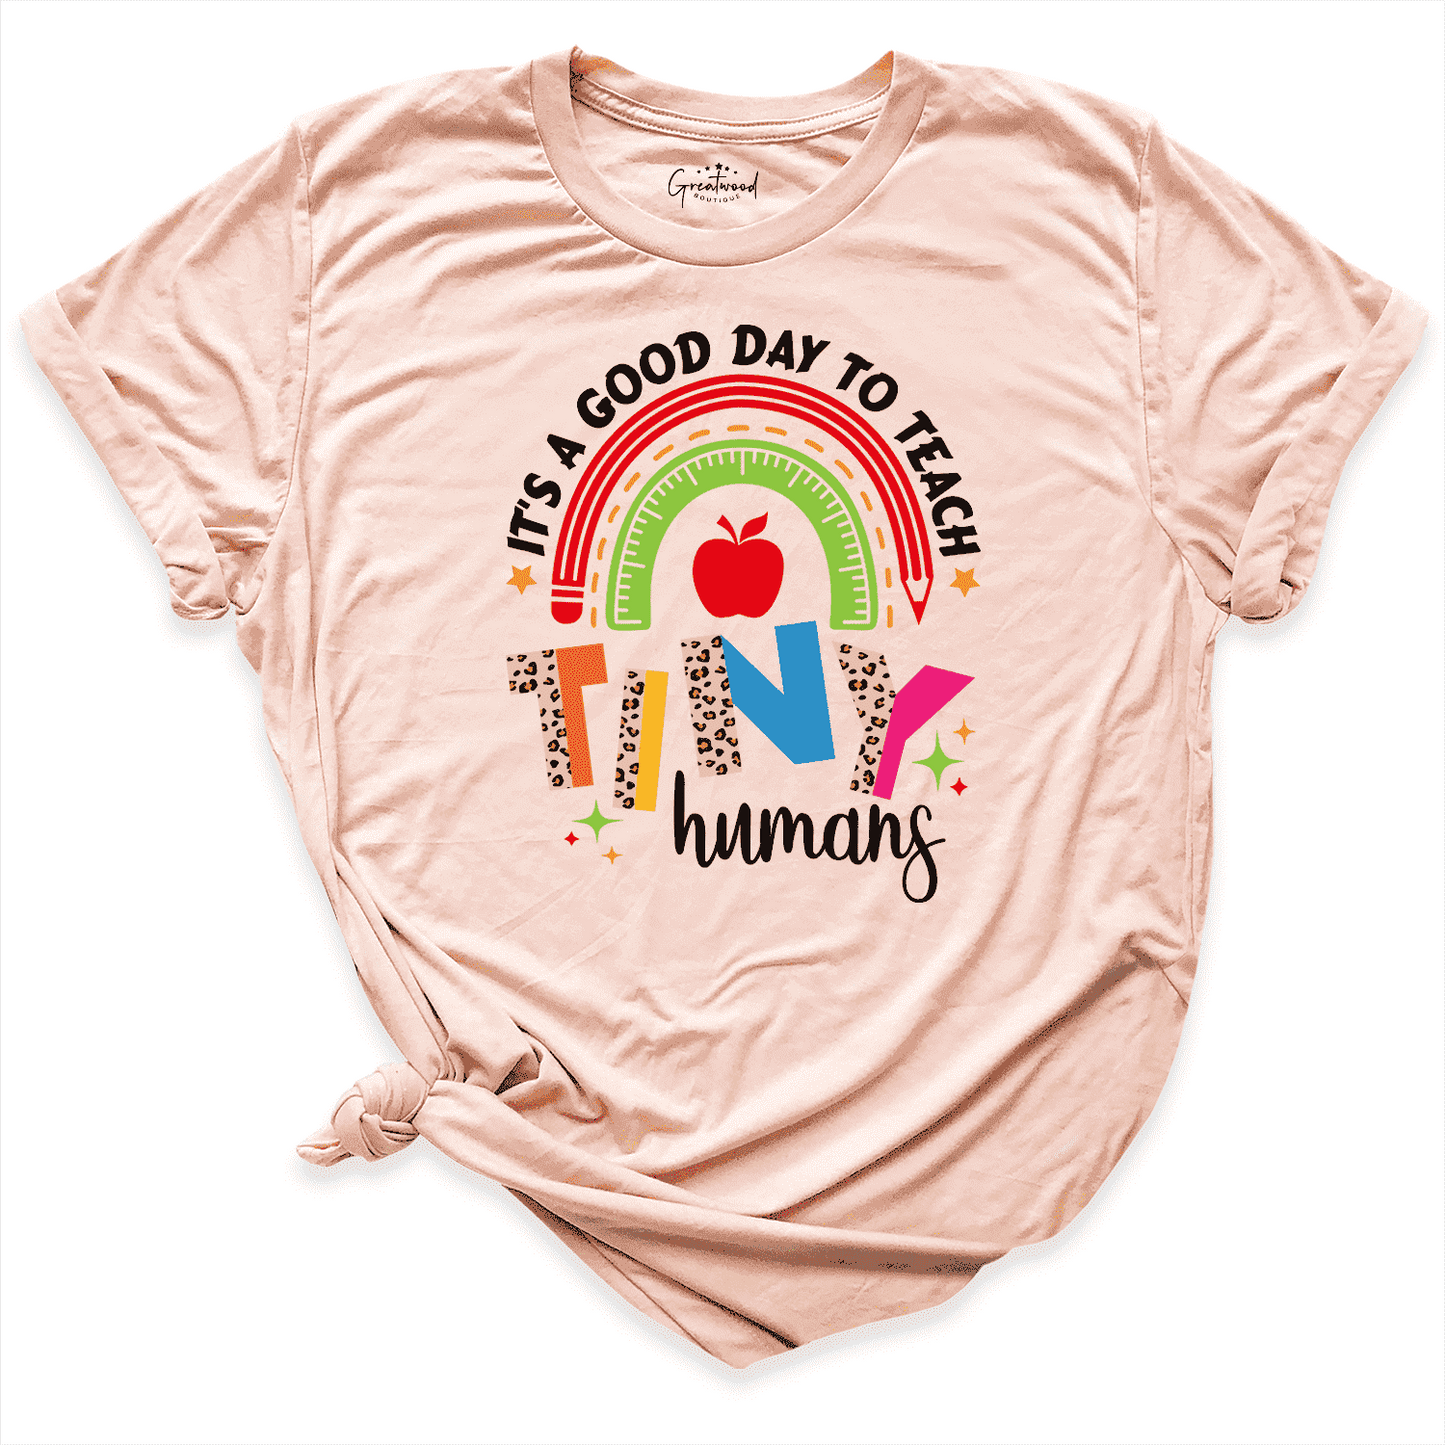 It's A Good Day To Teach Tiny Humans Shirt Peach - Greatwood Boutique